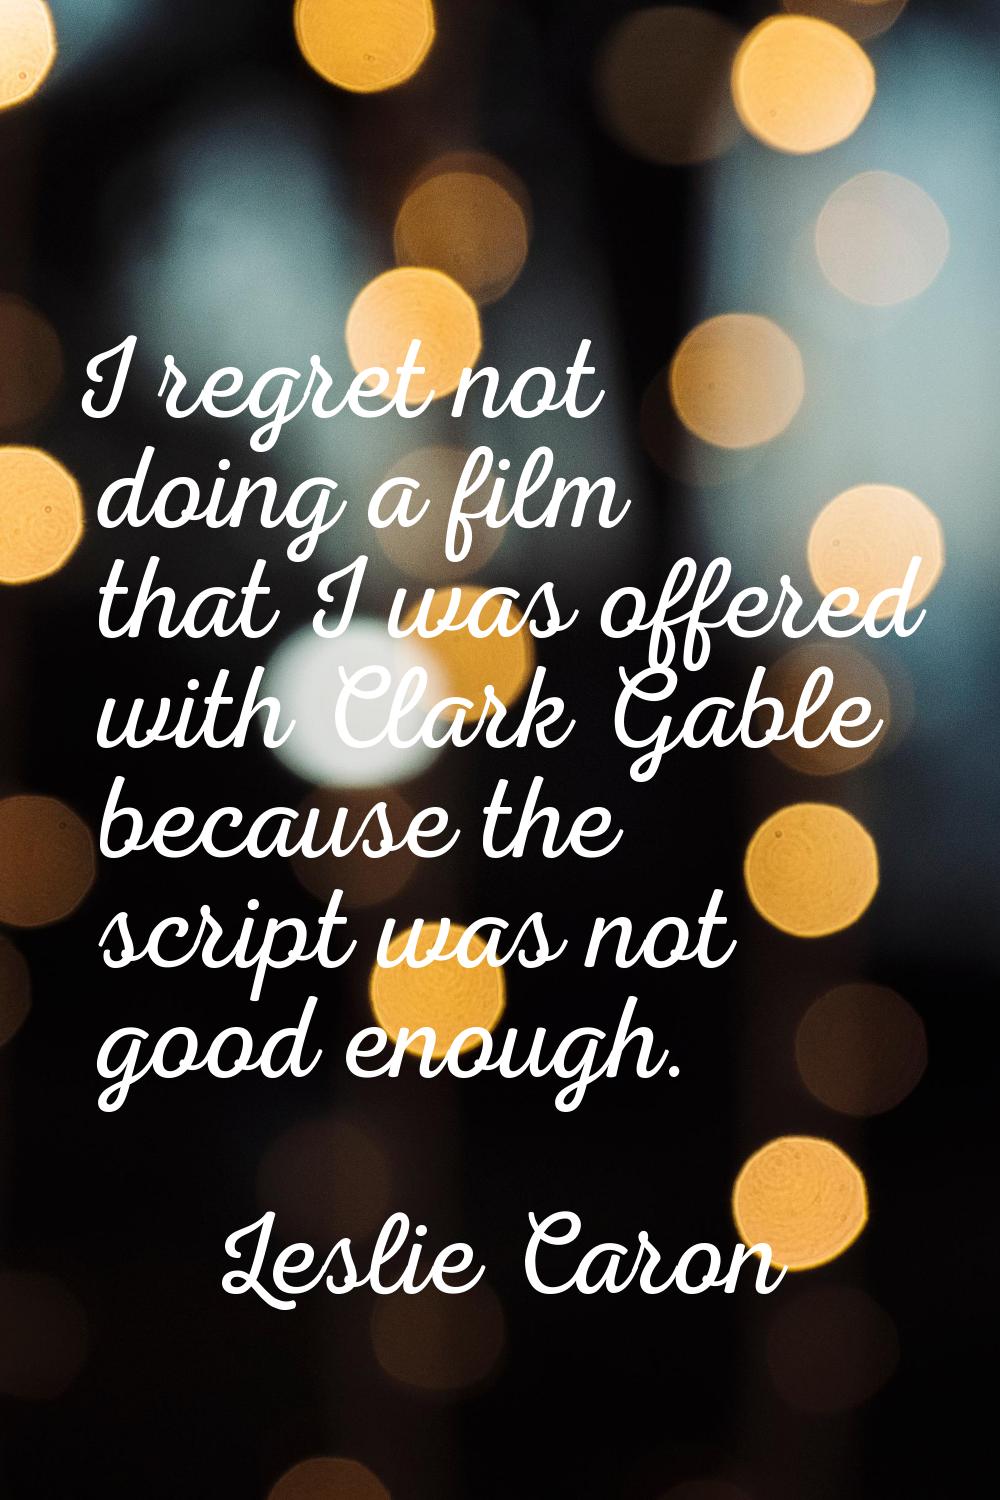 I regret not doing a film that I was offered with Clark Gable because the script was not good enoug